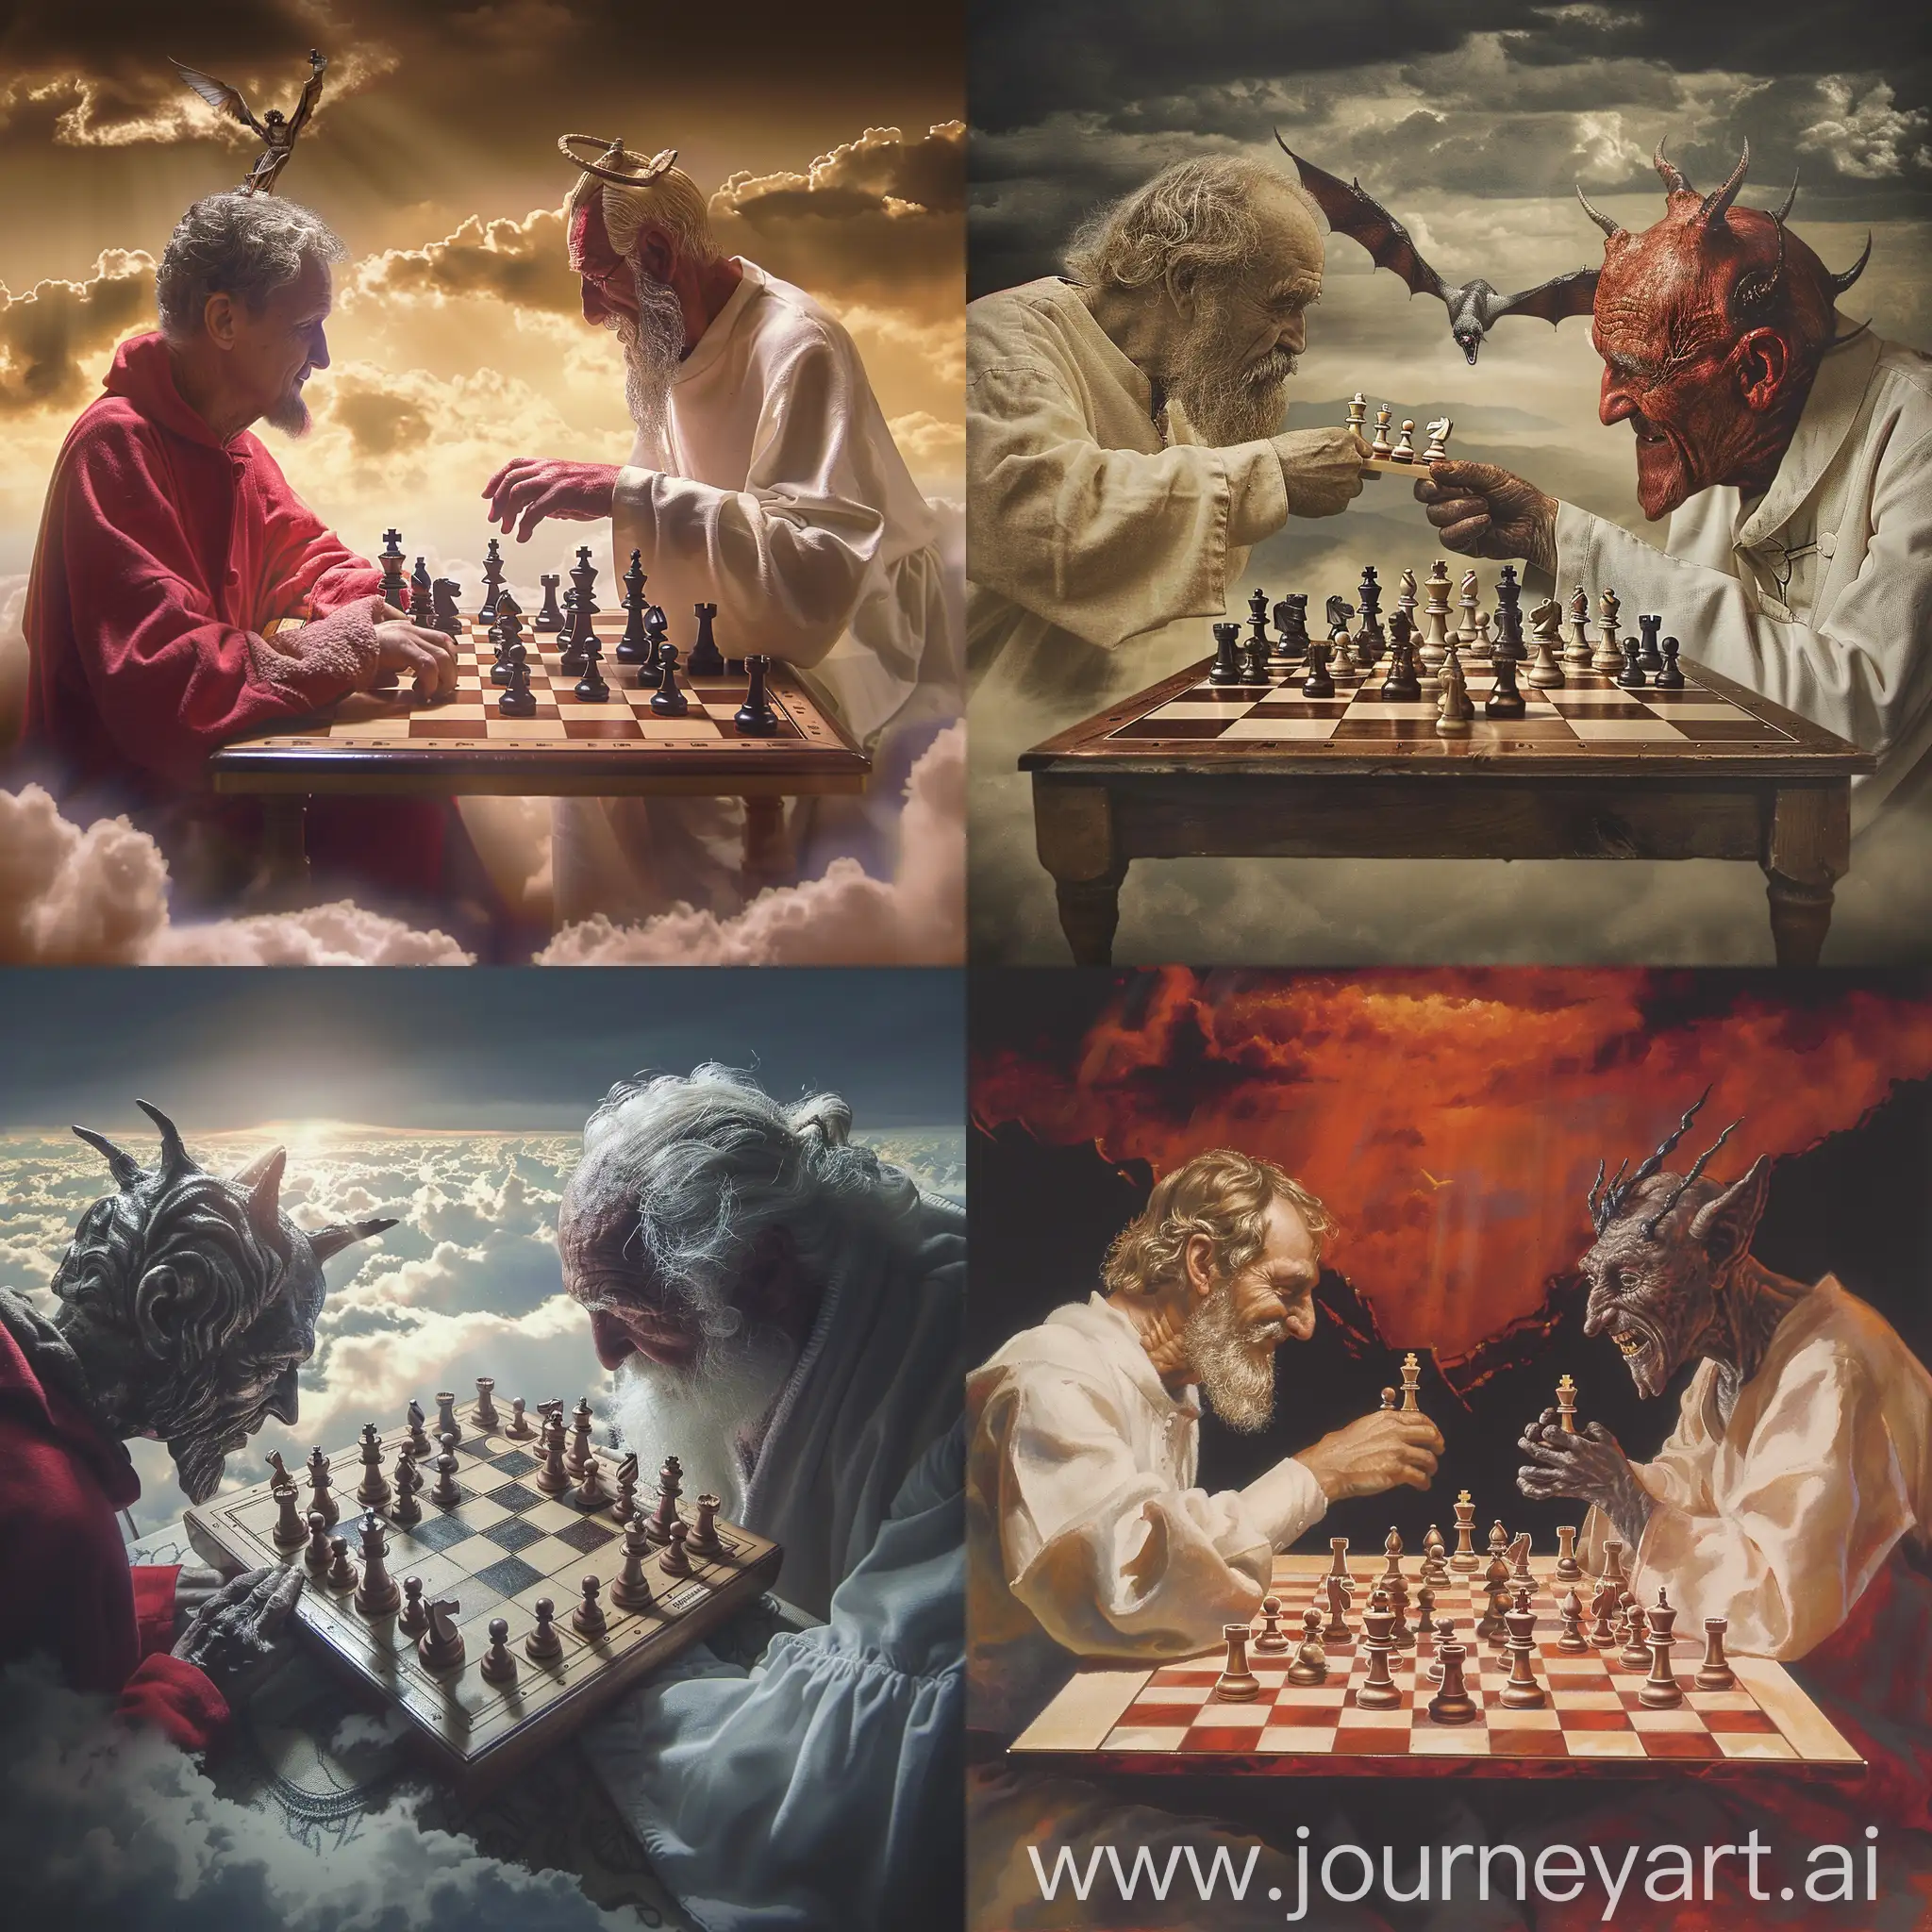 Divine-Chess-Match-Between-God-and-the-Devil-in-Heavenly-Realm